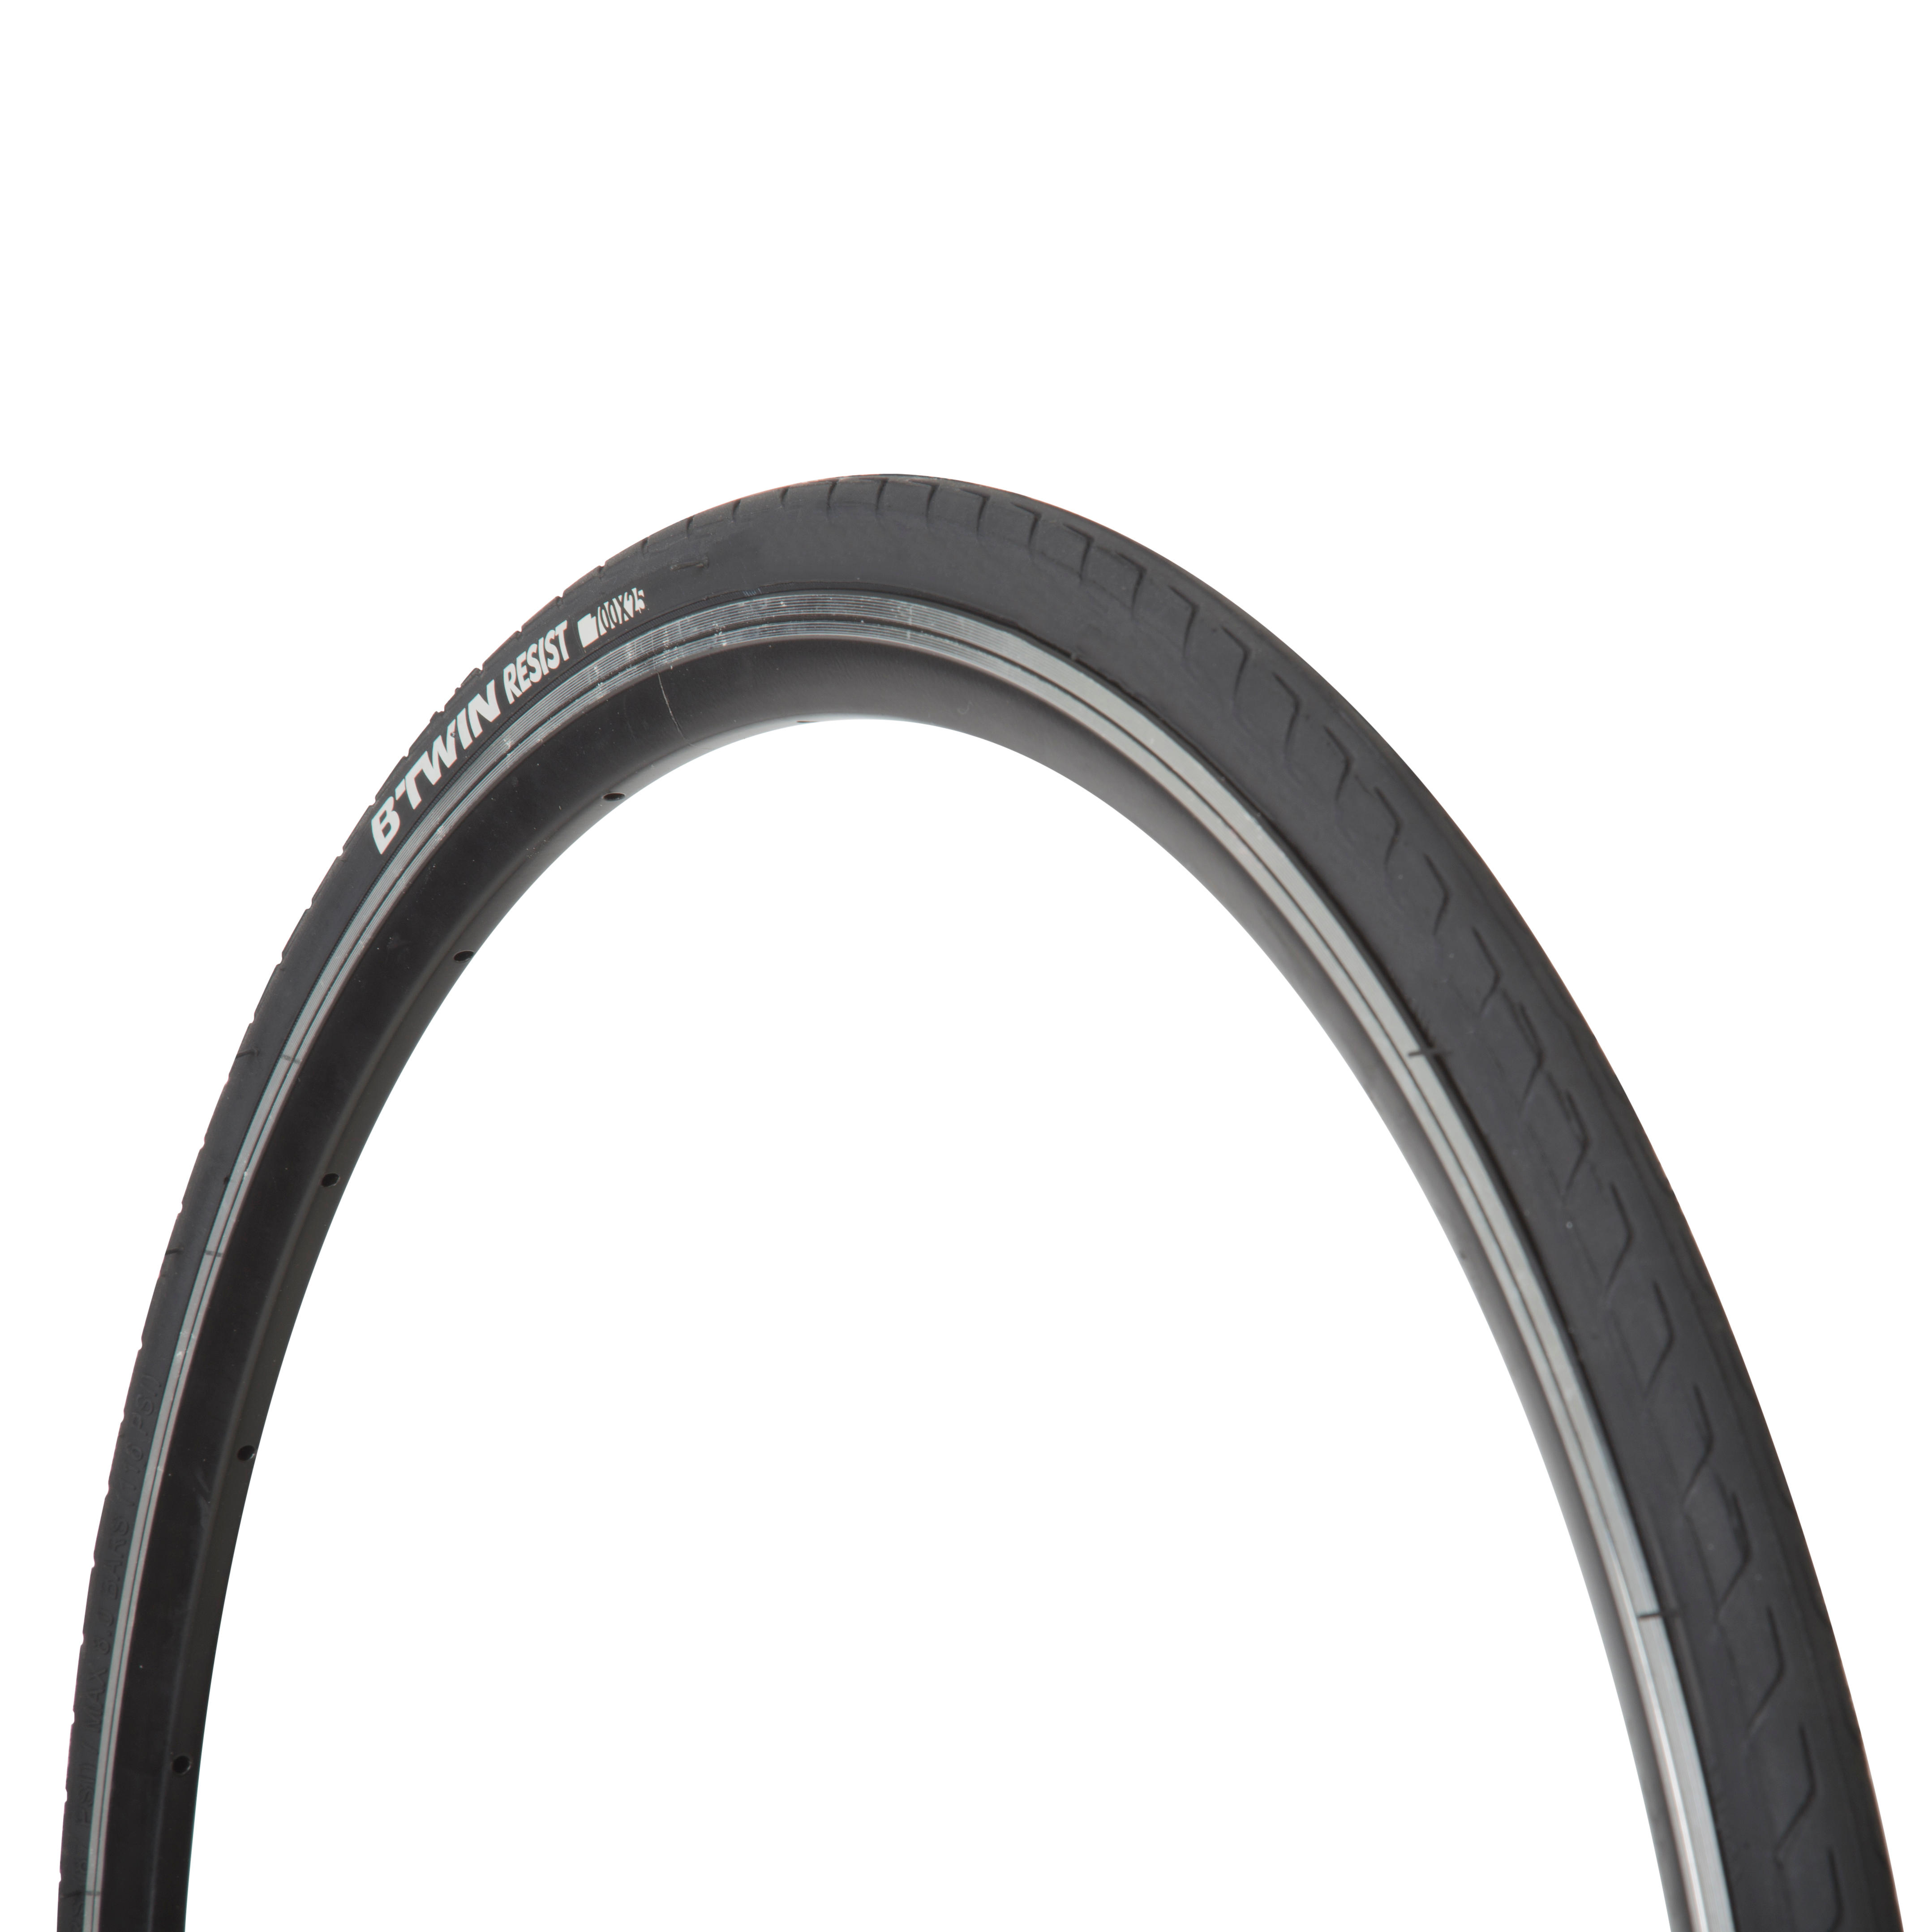 btwin resist protect 700x28